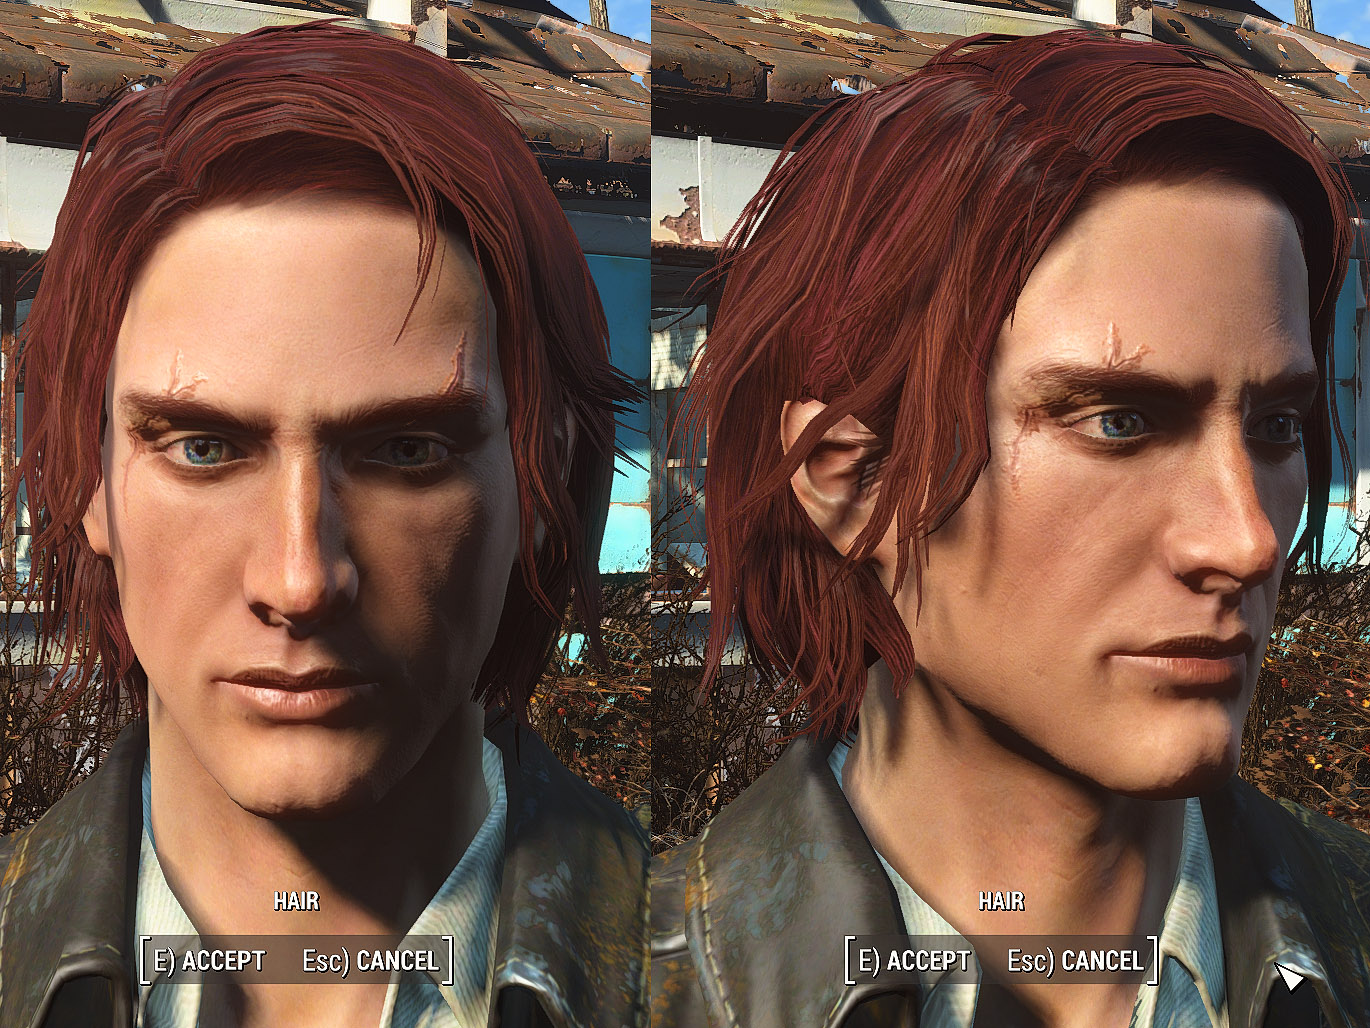 Male Hairstyles Fallout Face Mod Mods Fo4 Models Hairstyle Female.